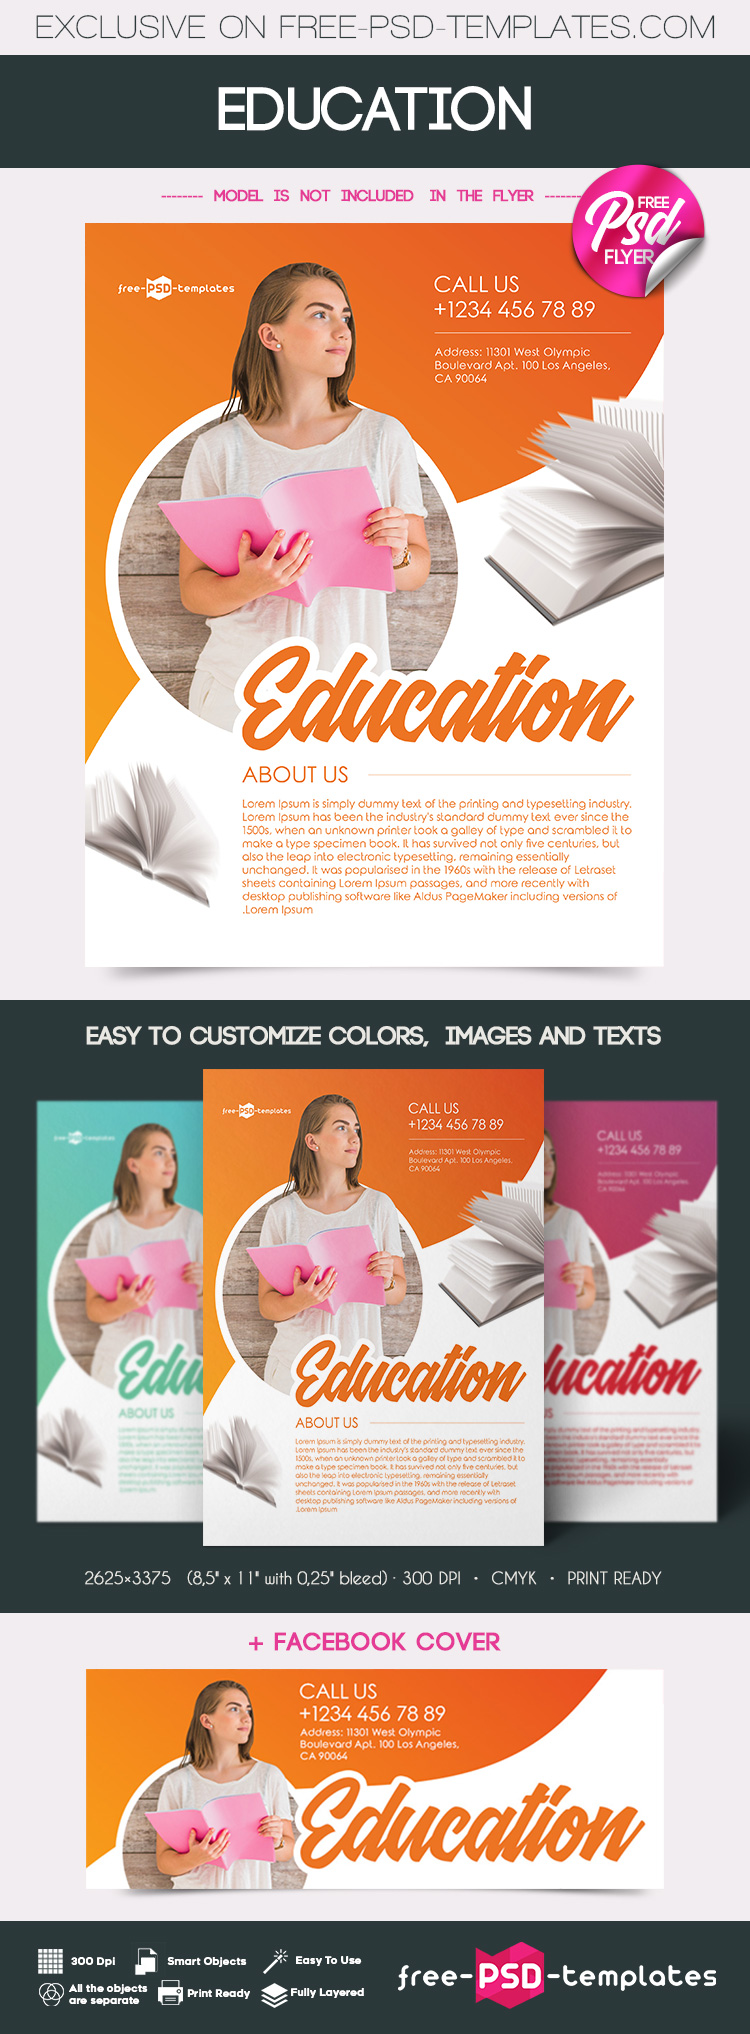 Free Education Flyer in PSD  Free PSD Templates Within Free Education Flyer Templates